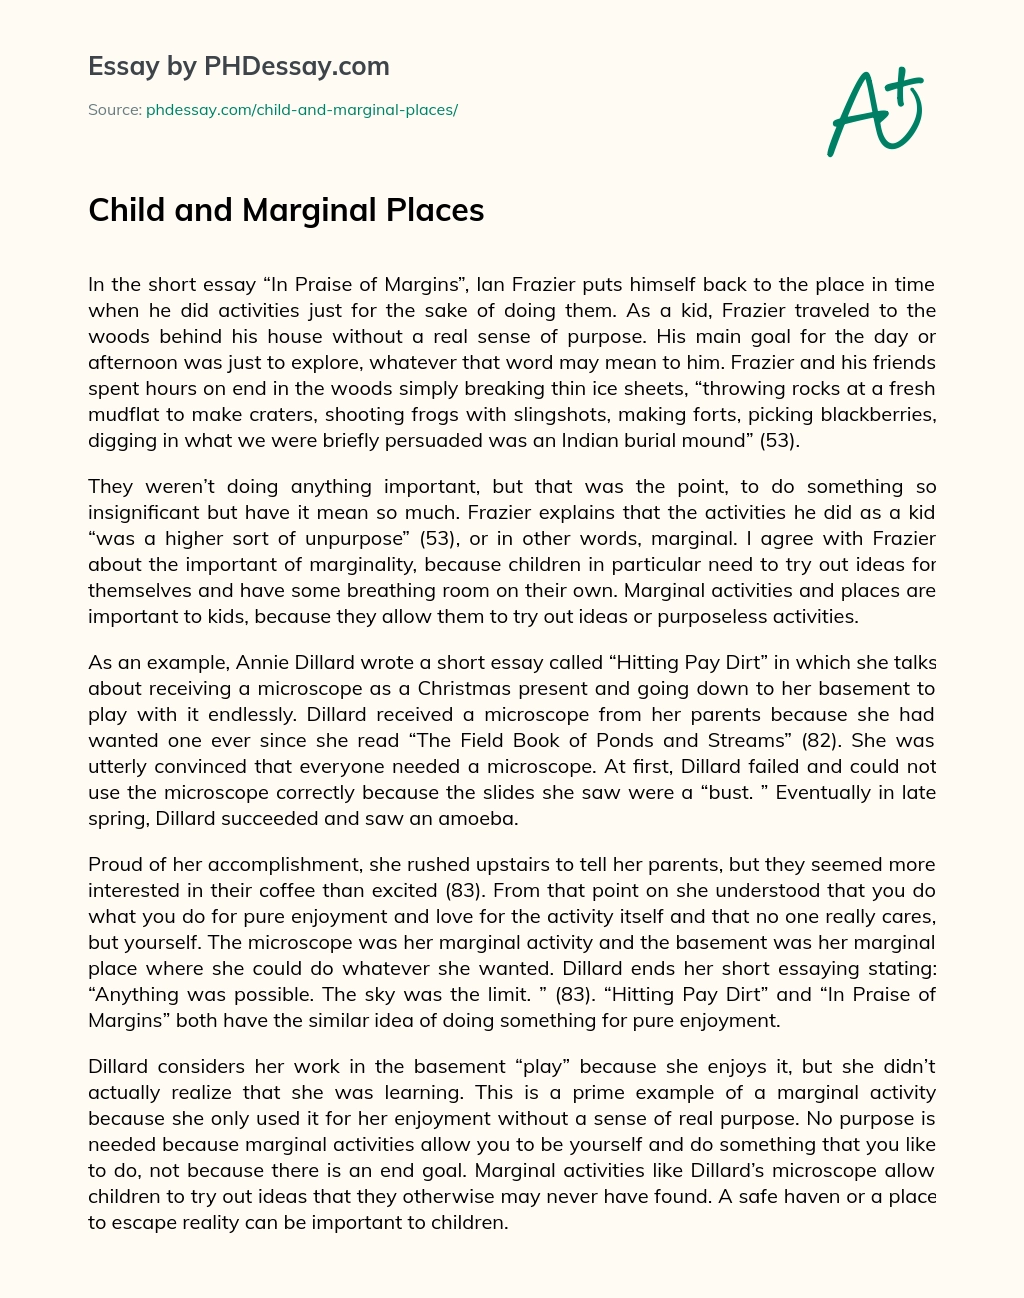 Child and Marginal Places essay